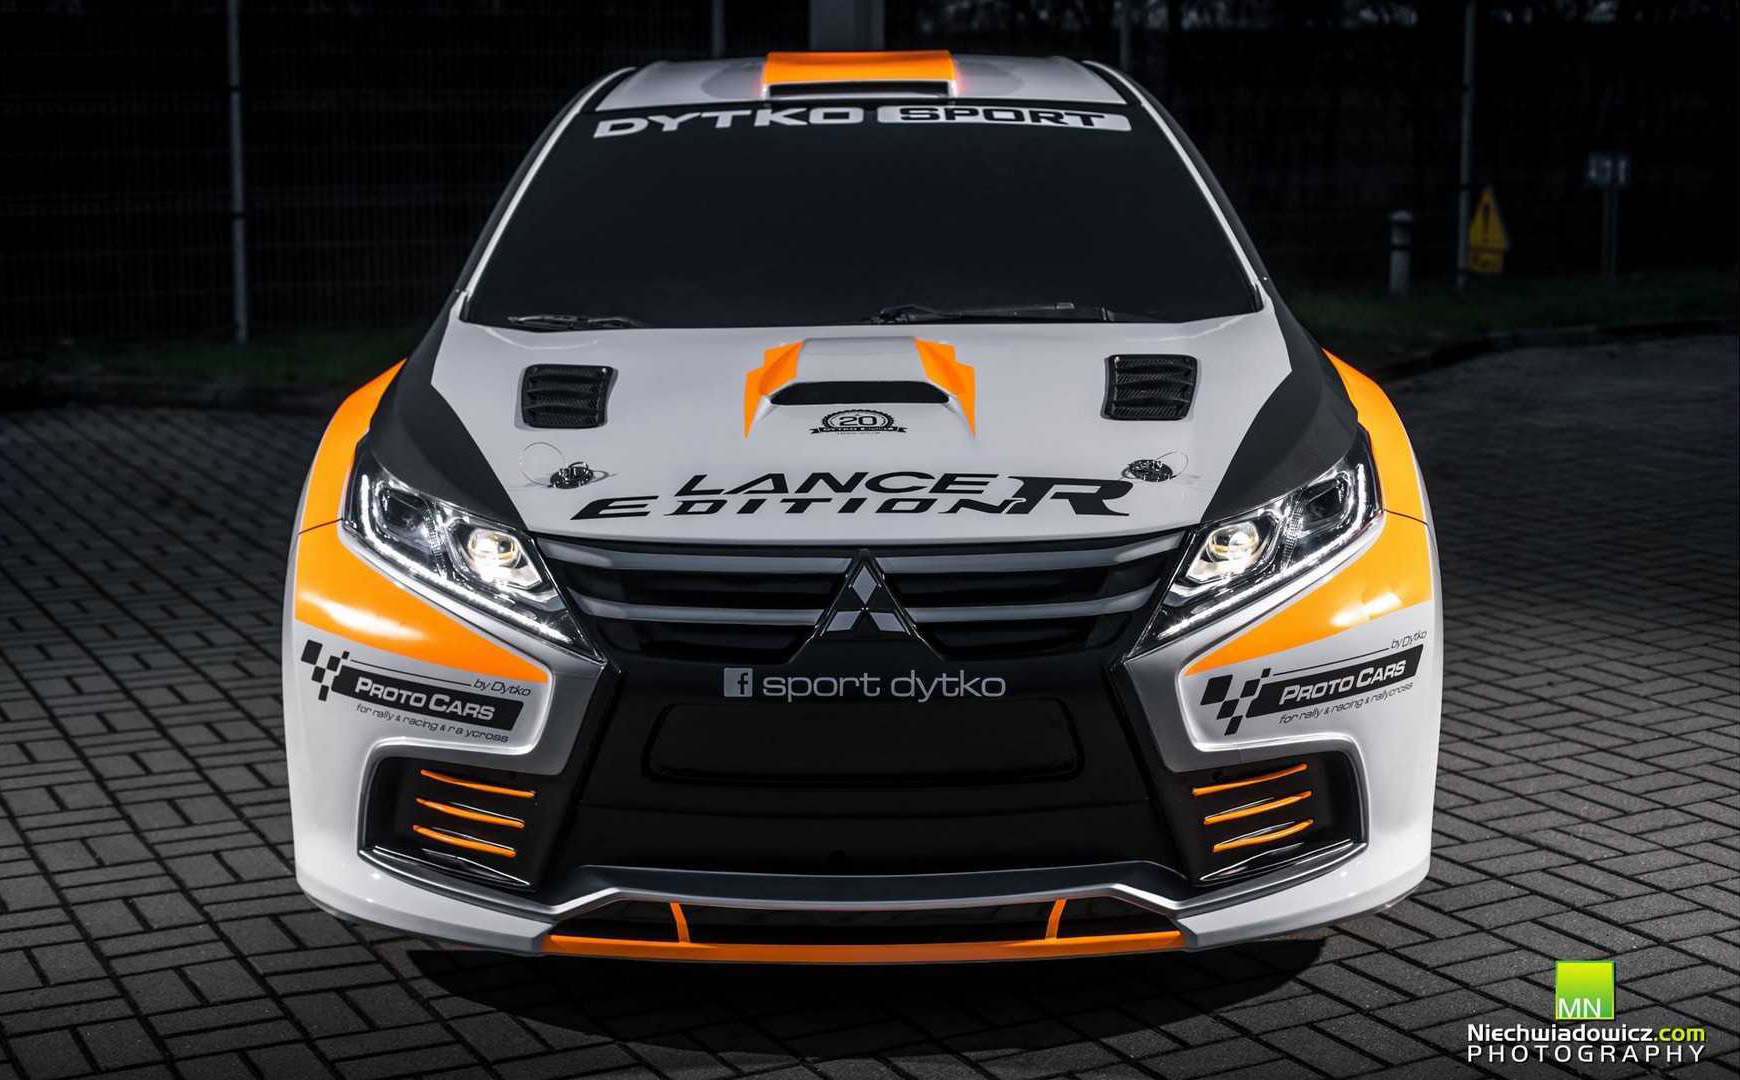 New Lancer Edition R 2019 - by Proto Cars and Dytko Sport 1